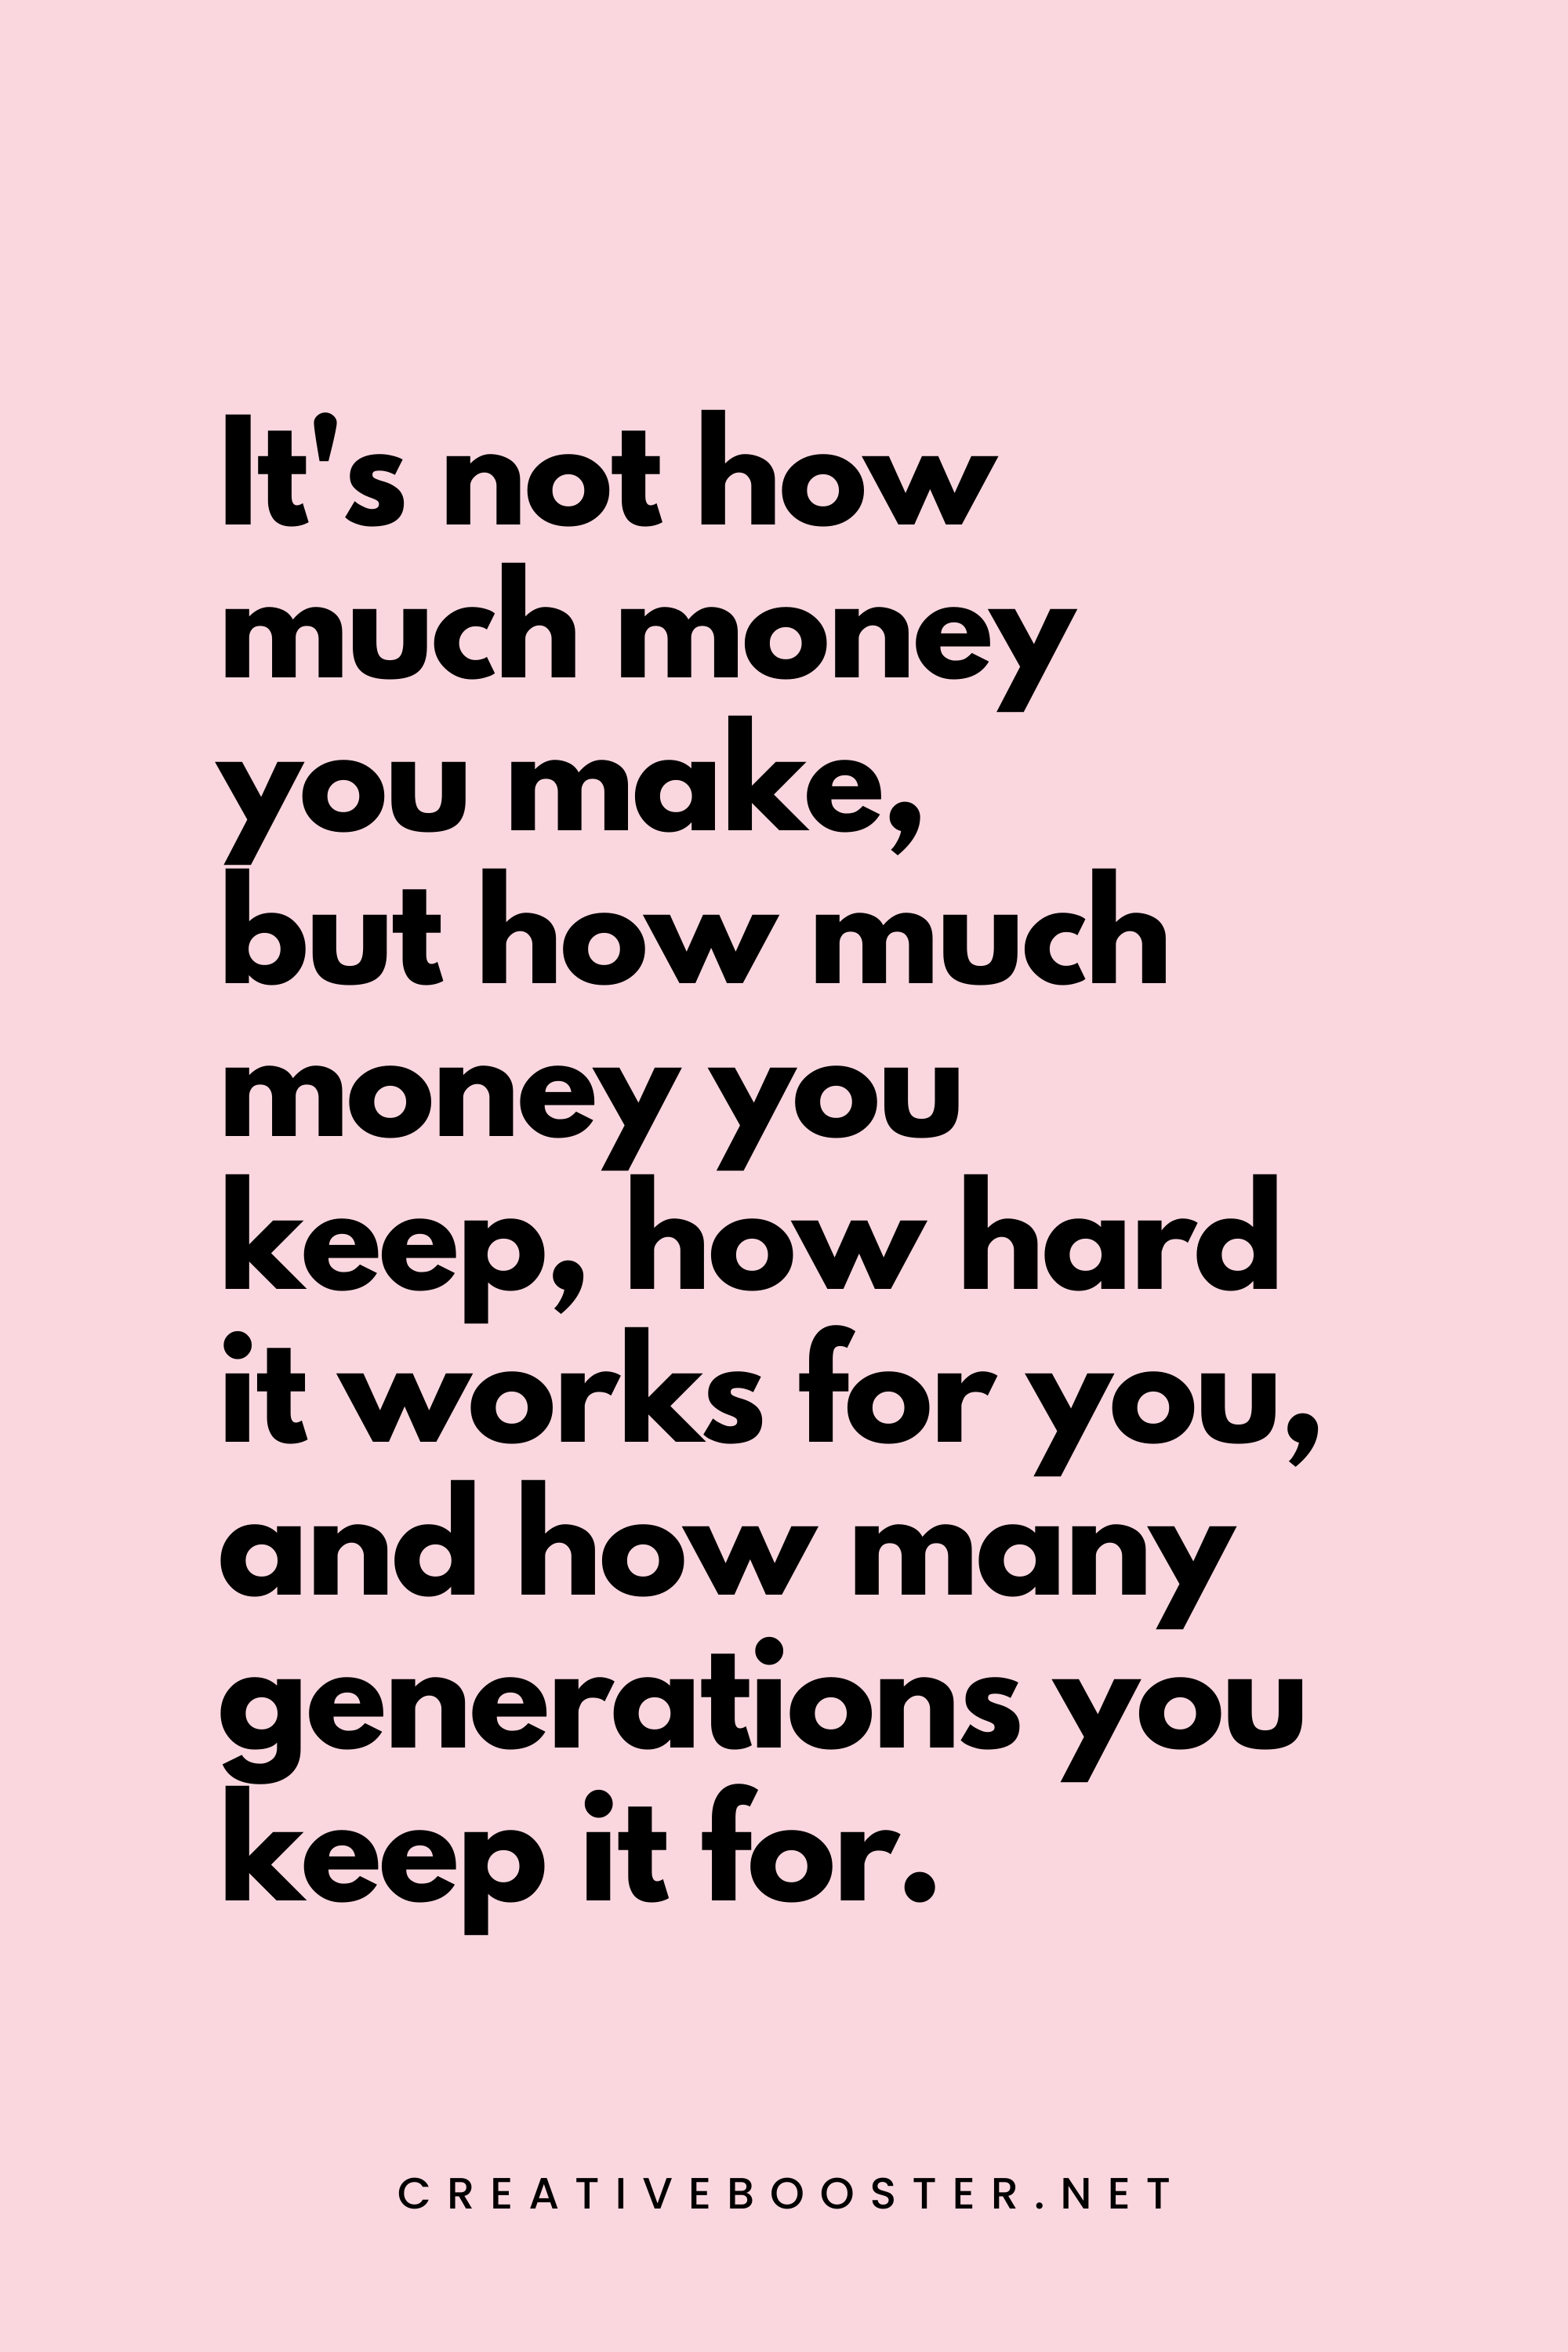 67. It's not how much money you make, but how much money you keep, how hard it works for you, and how many generations you keep it for. - Robert Kiyosaki - 7. Financial Freedom Quotes by Robert Kiyosaki